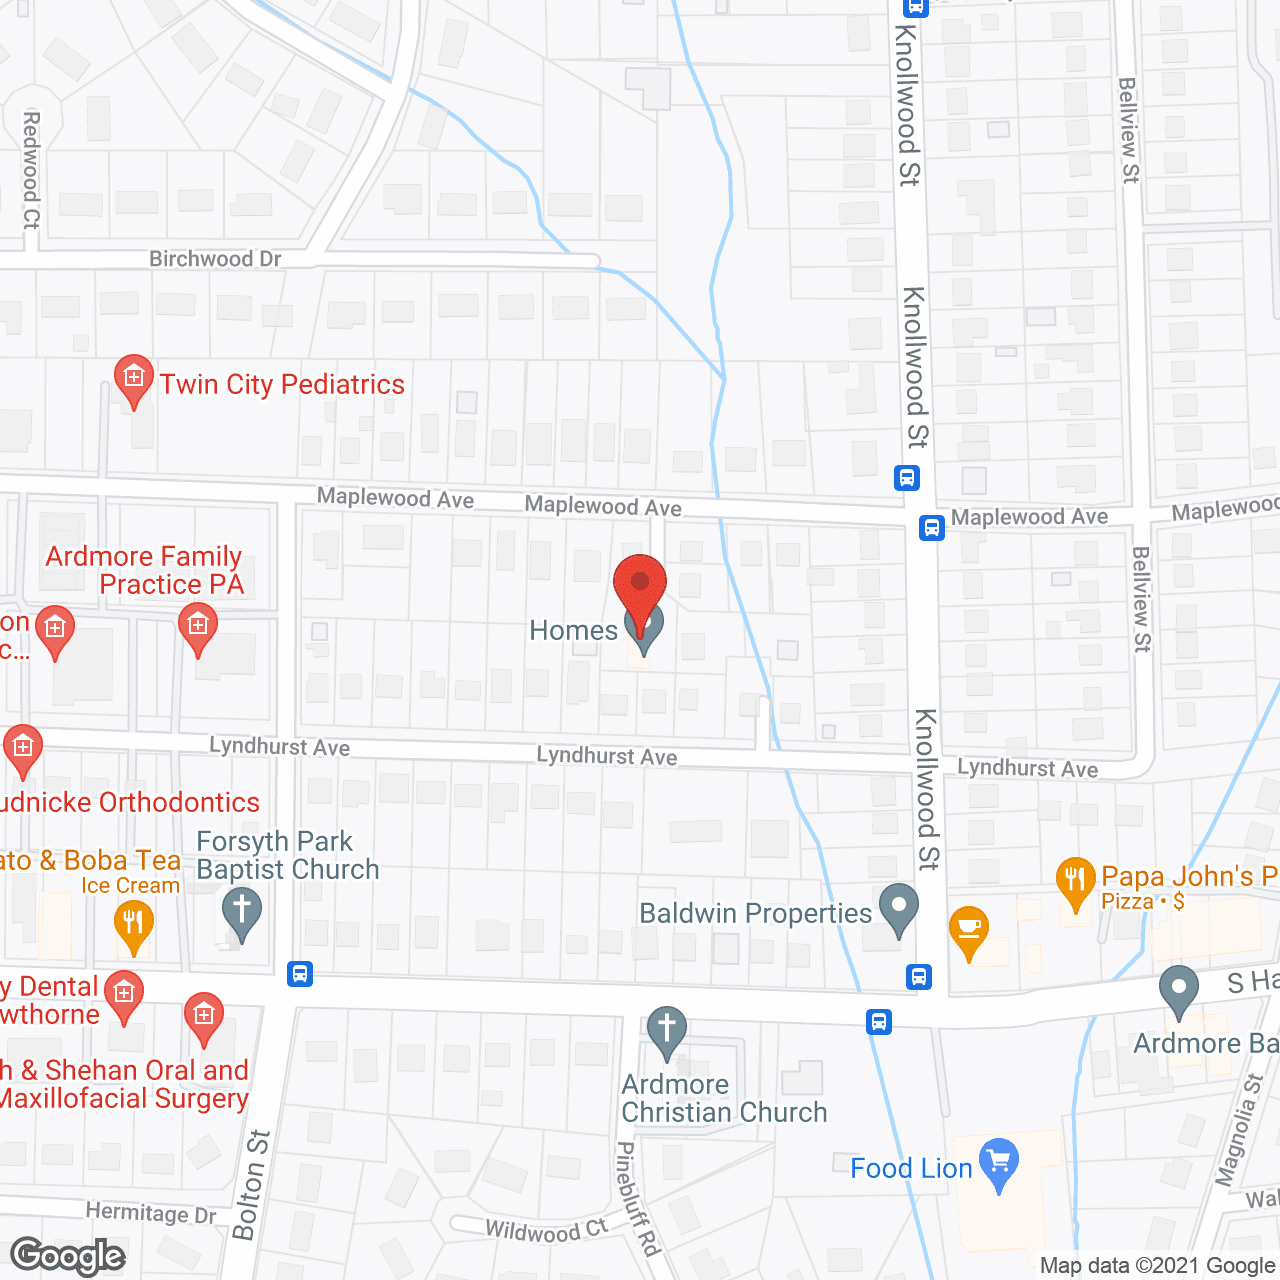 Quality Care Homes LLC in google map